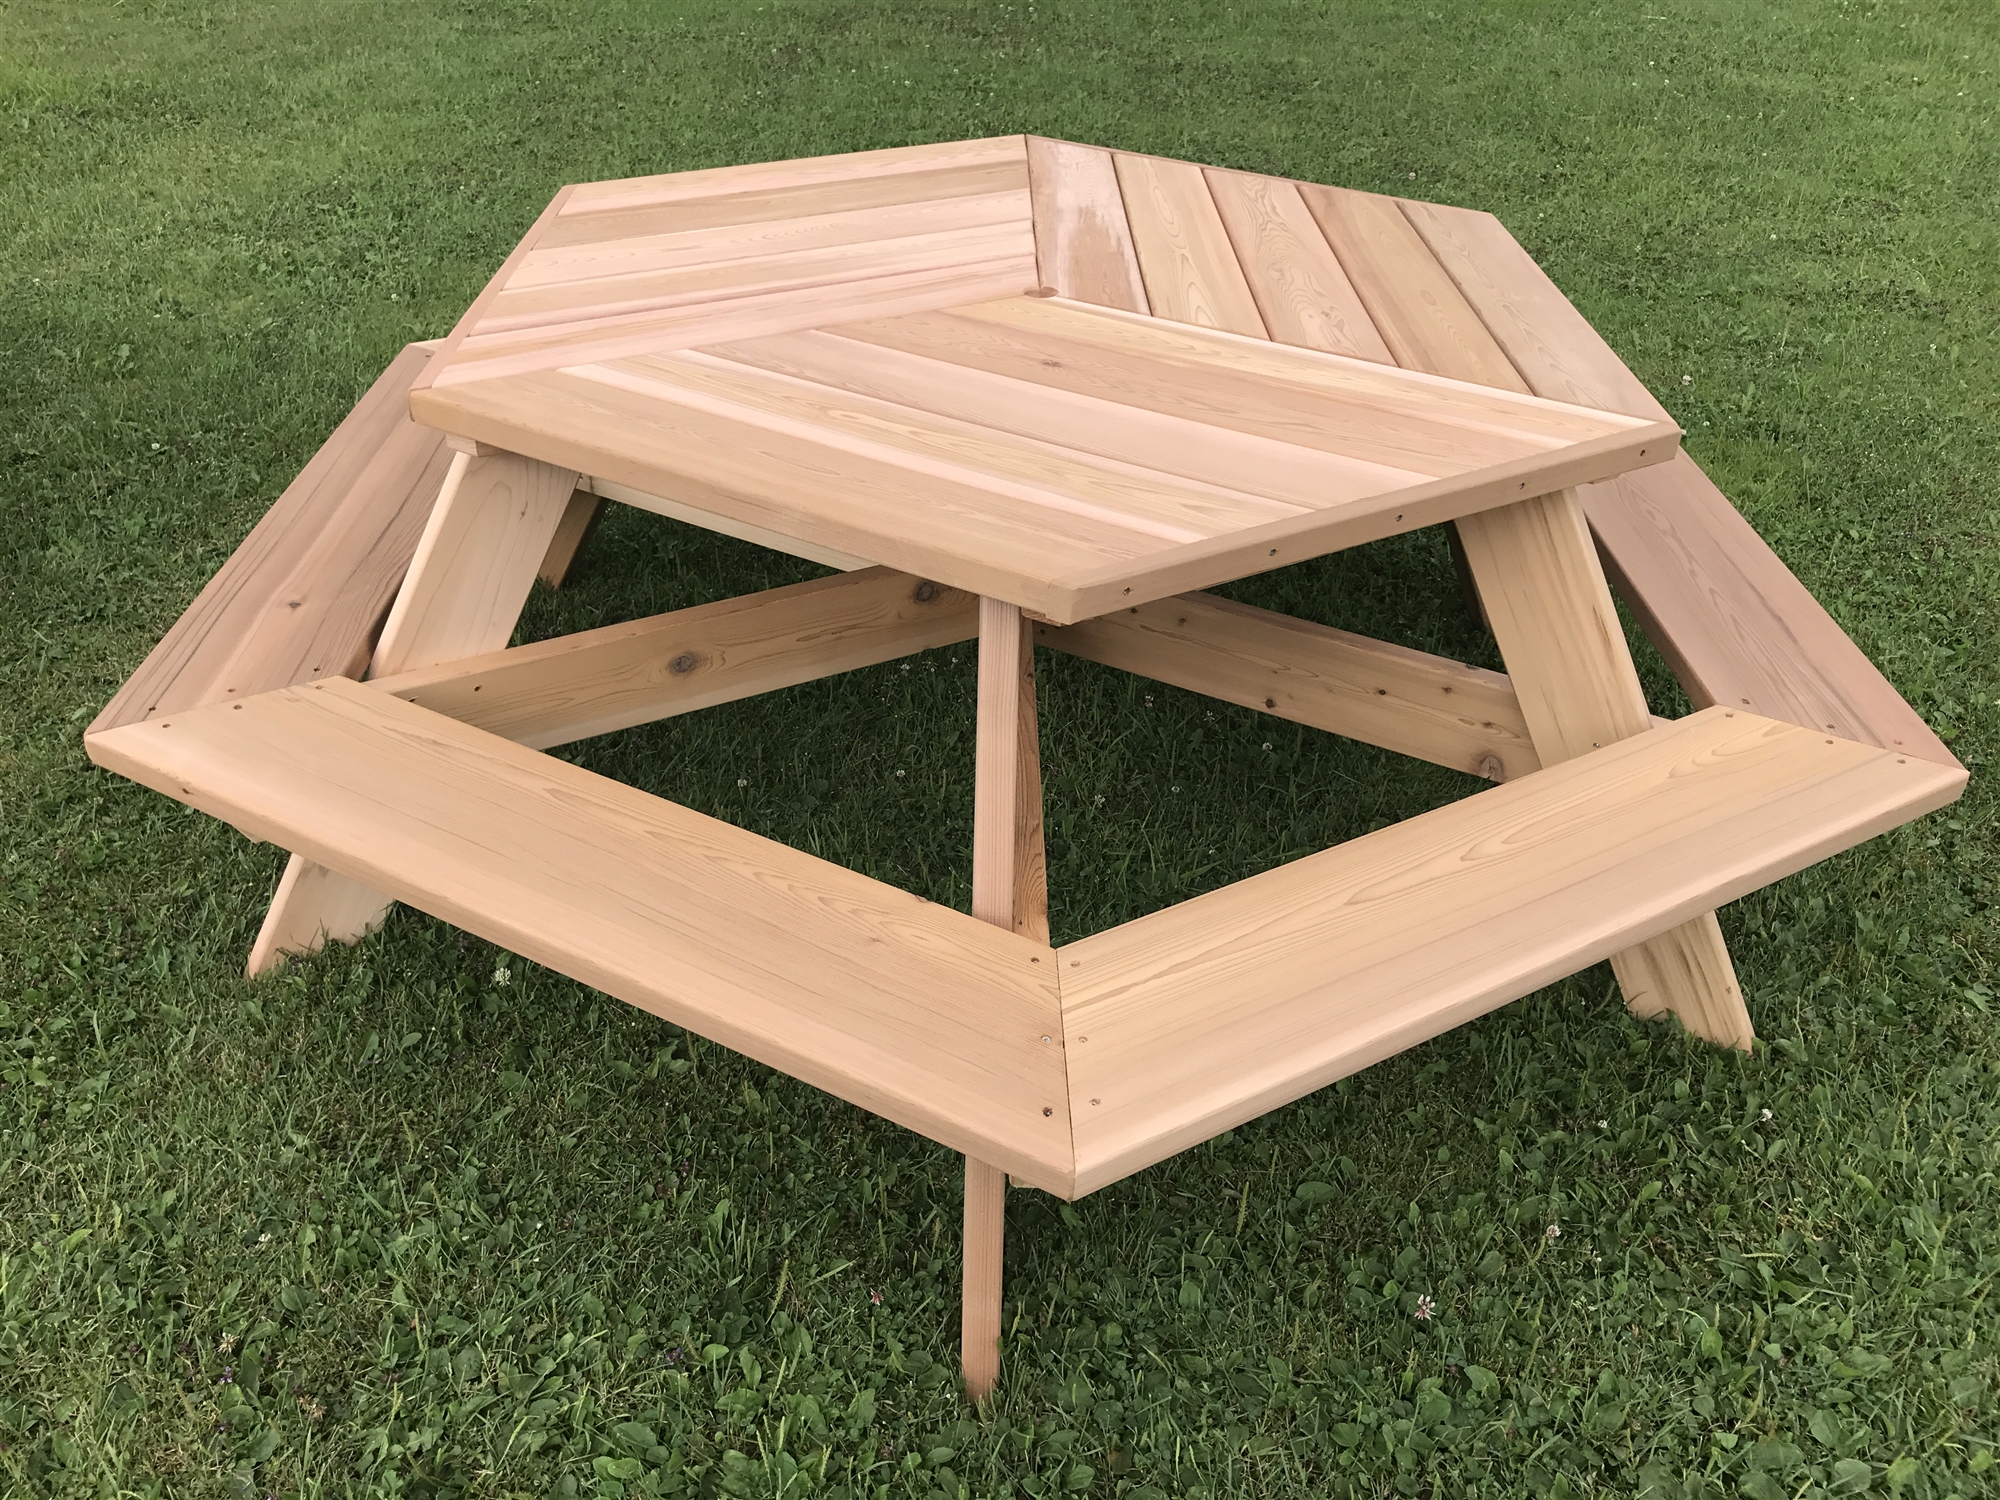 Picnic Tables: One Of The Best Tables To Enhance The Beauty While Having Fun At The Same Time